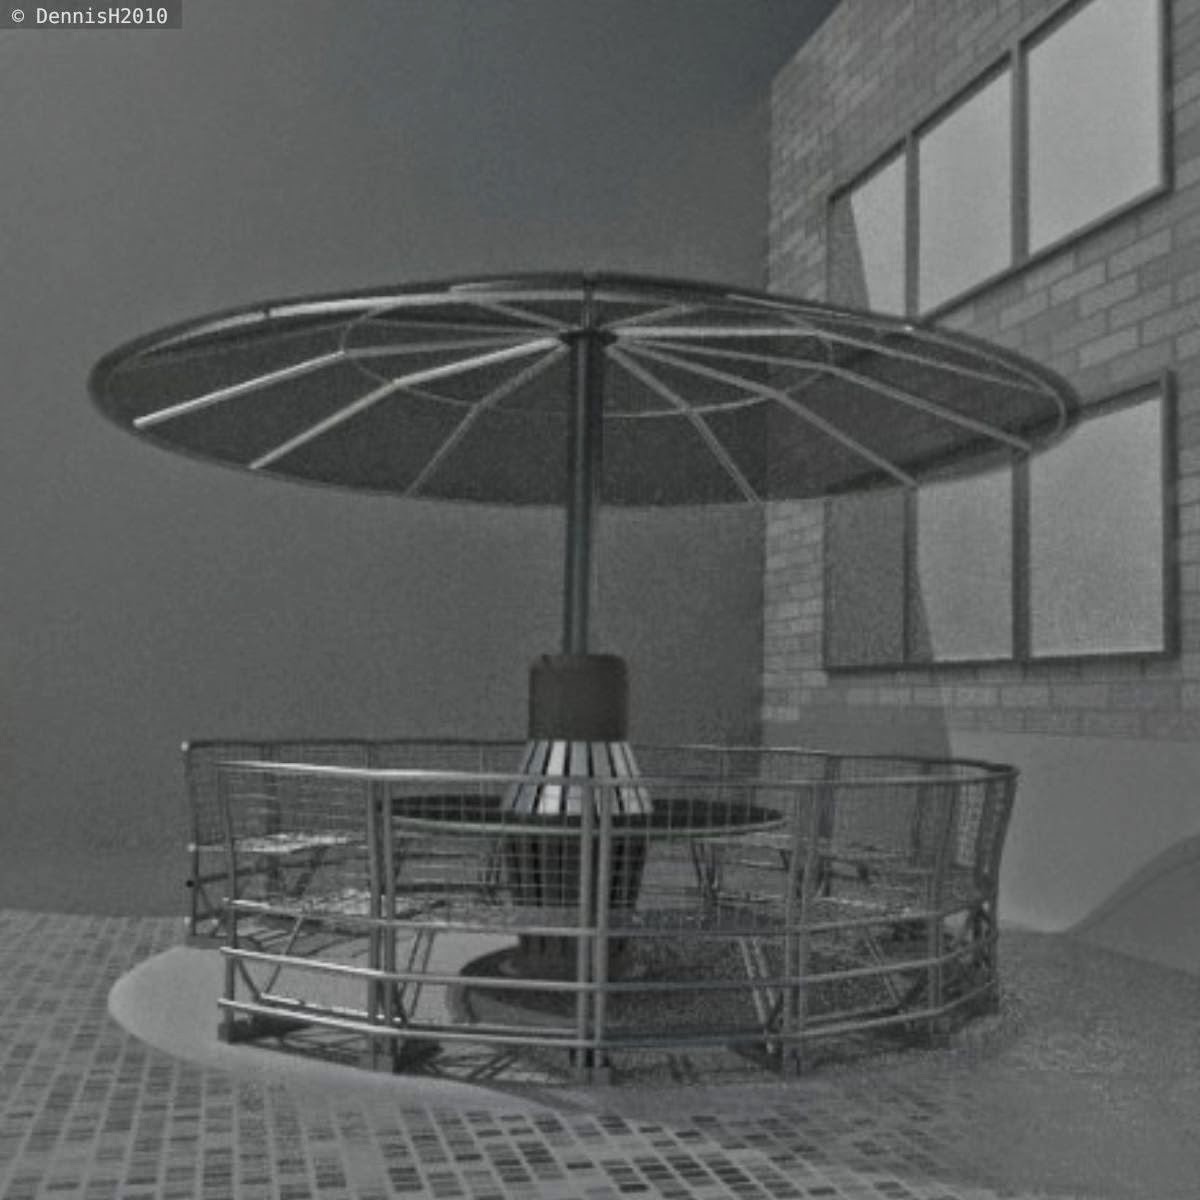  A round bench made of stainless steel with a rigged rain/sun protection by DennisH2010